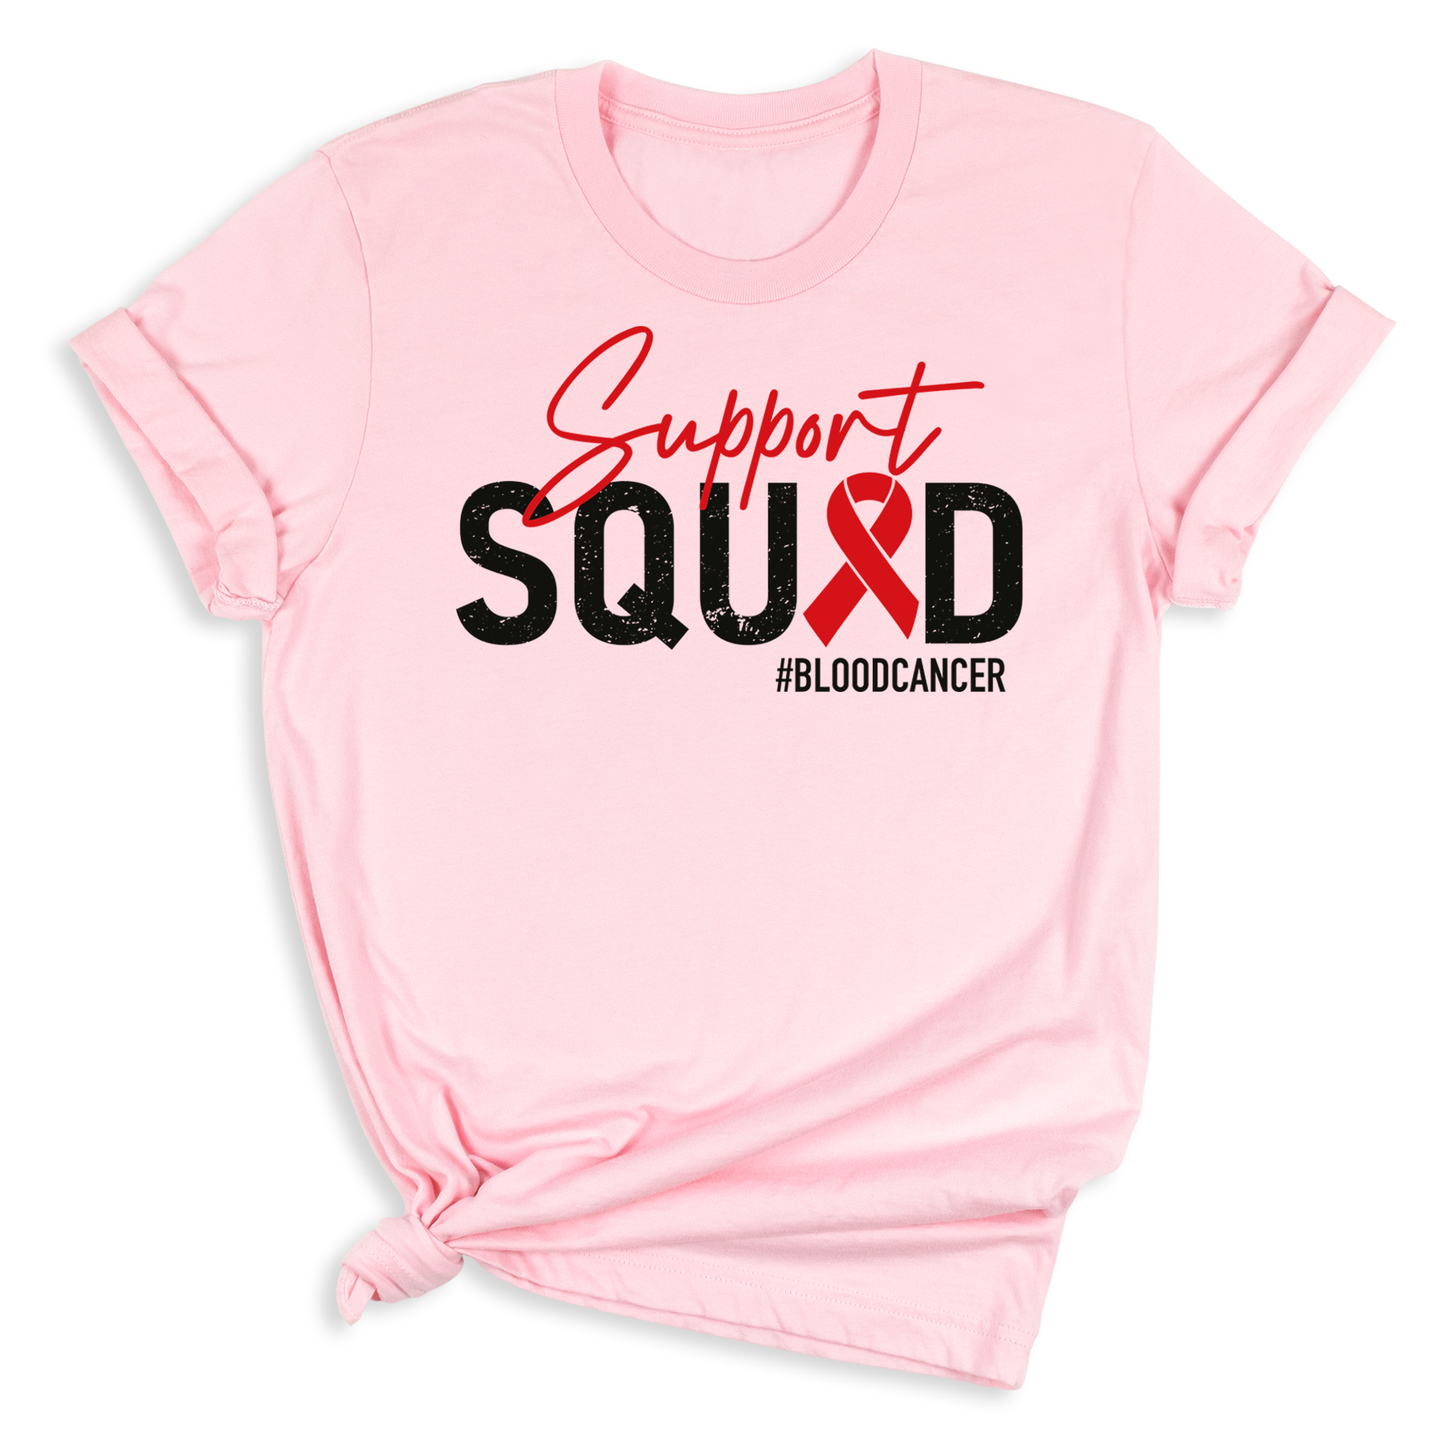 Blood Cancer Support Squad Shirts